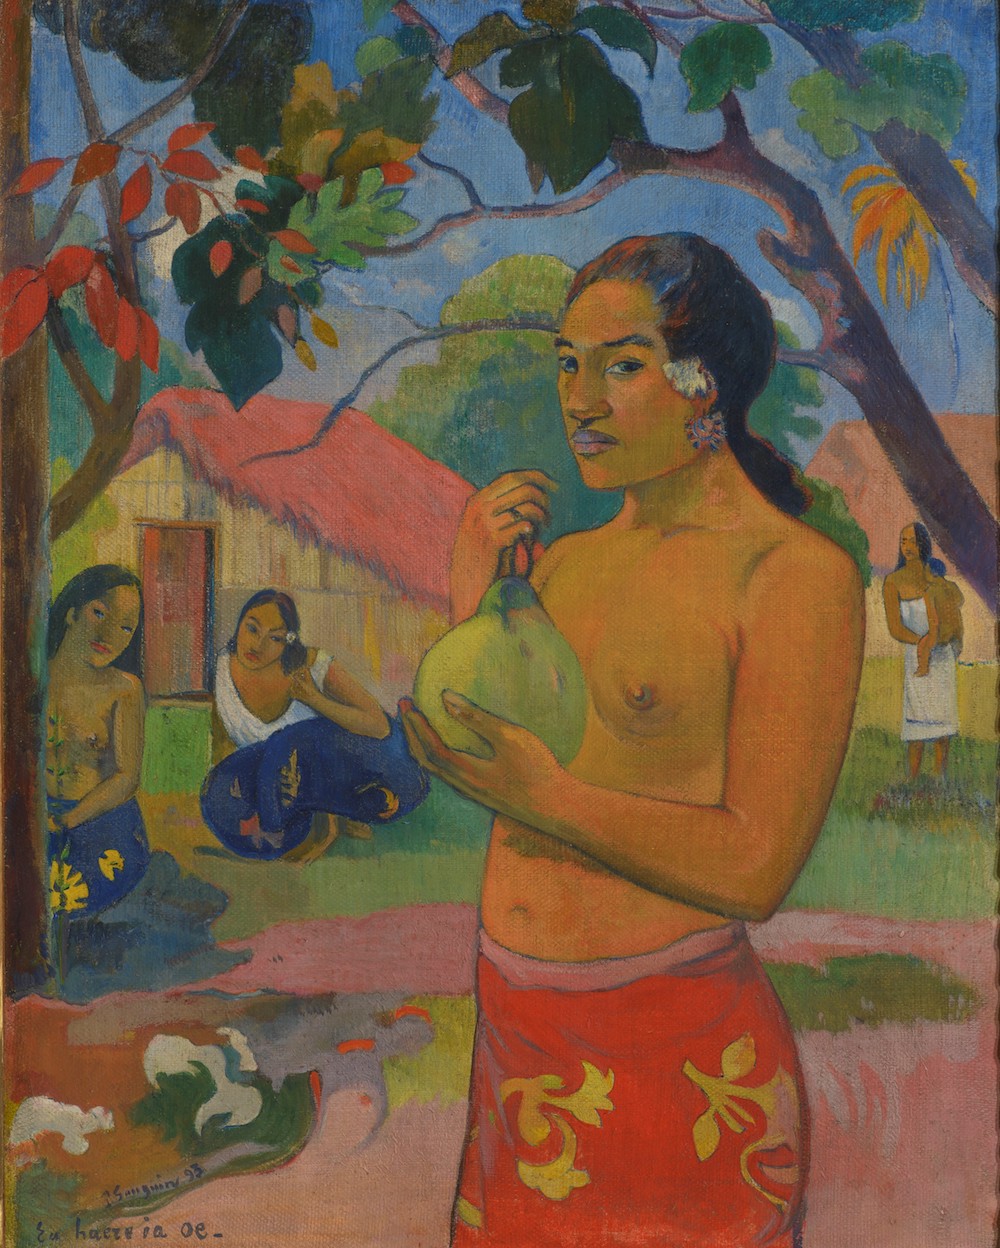 Image: Woman Holding a Fruit, Where Are You Going, Tahiti, by Paul Gauguin, 1893.